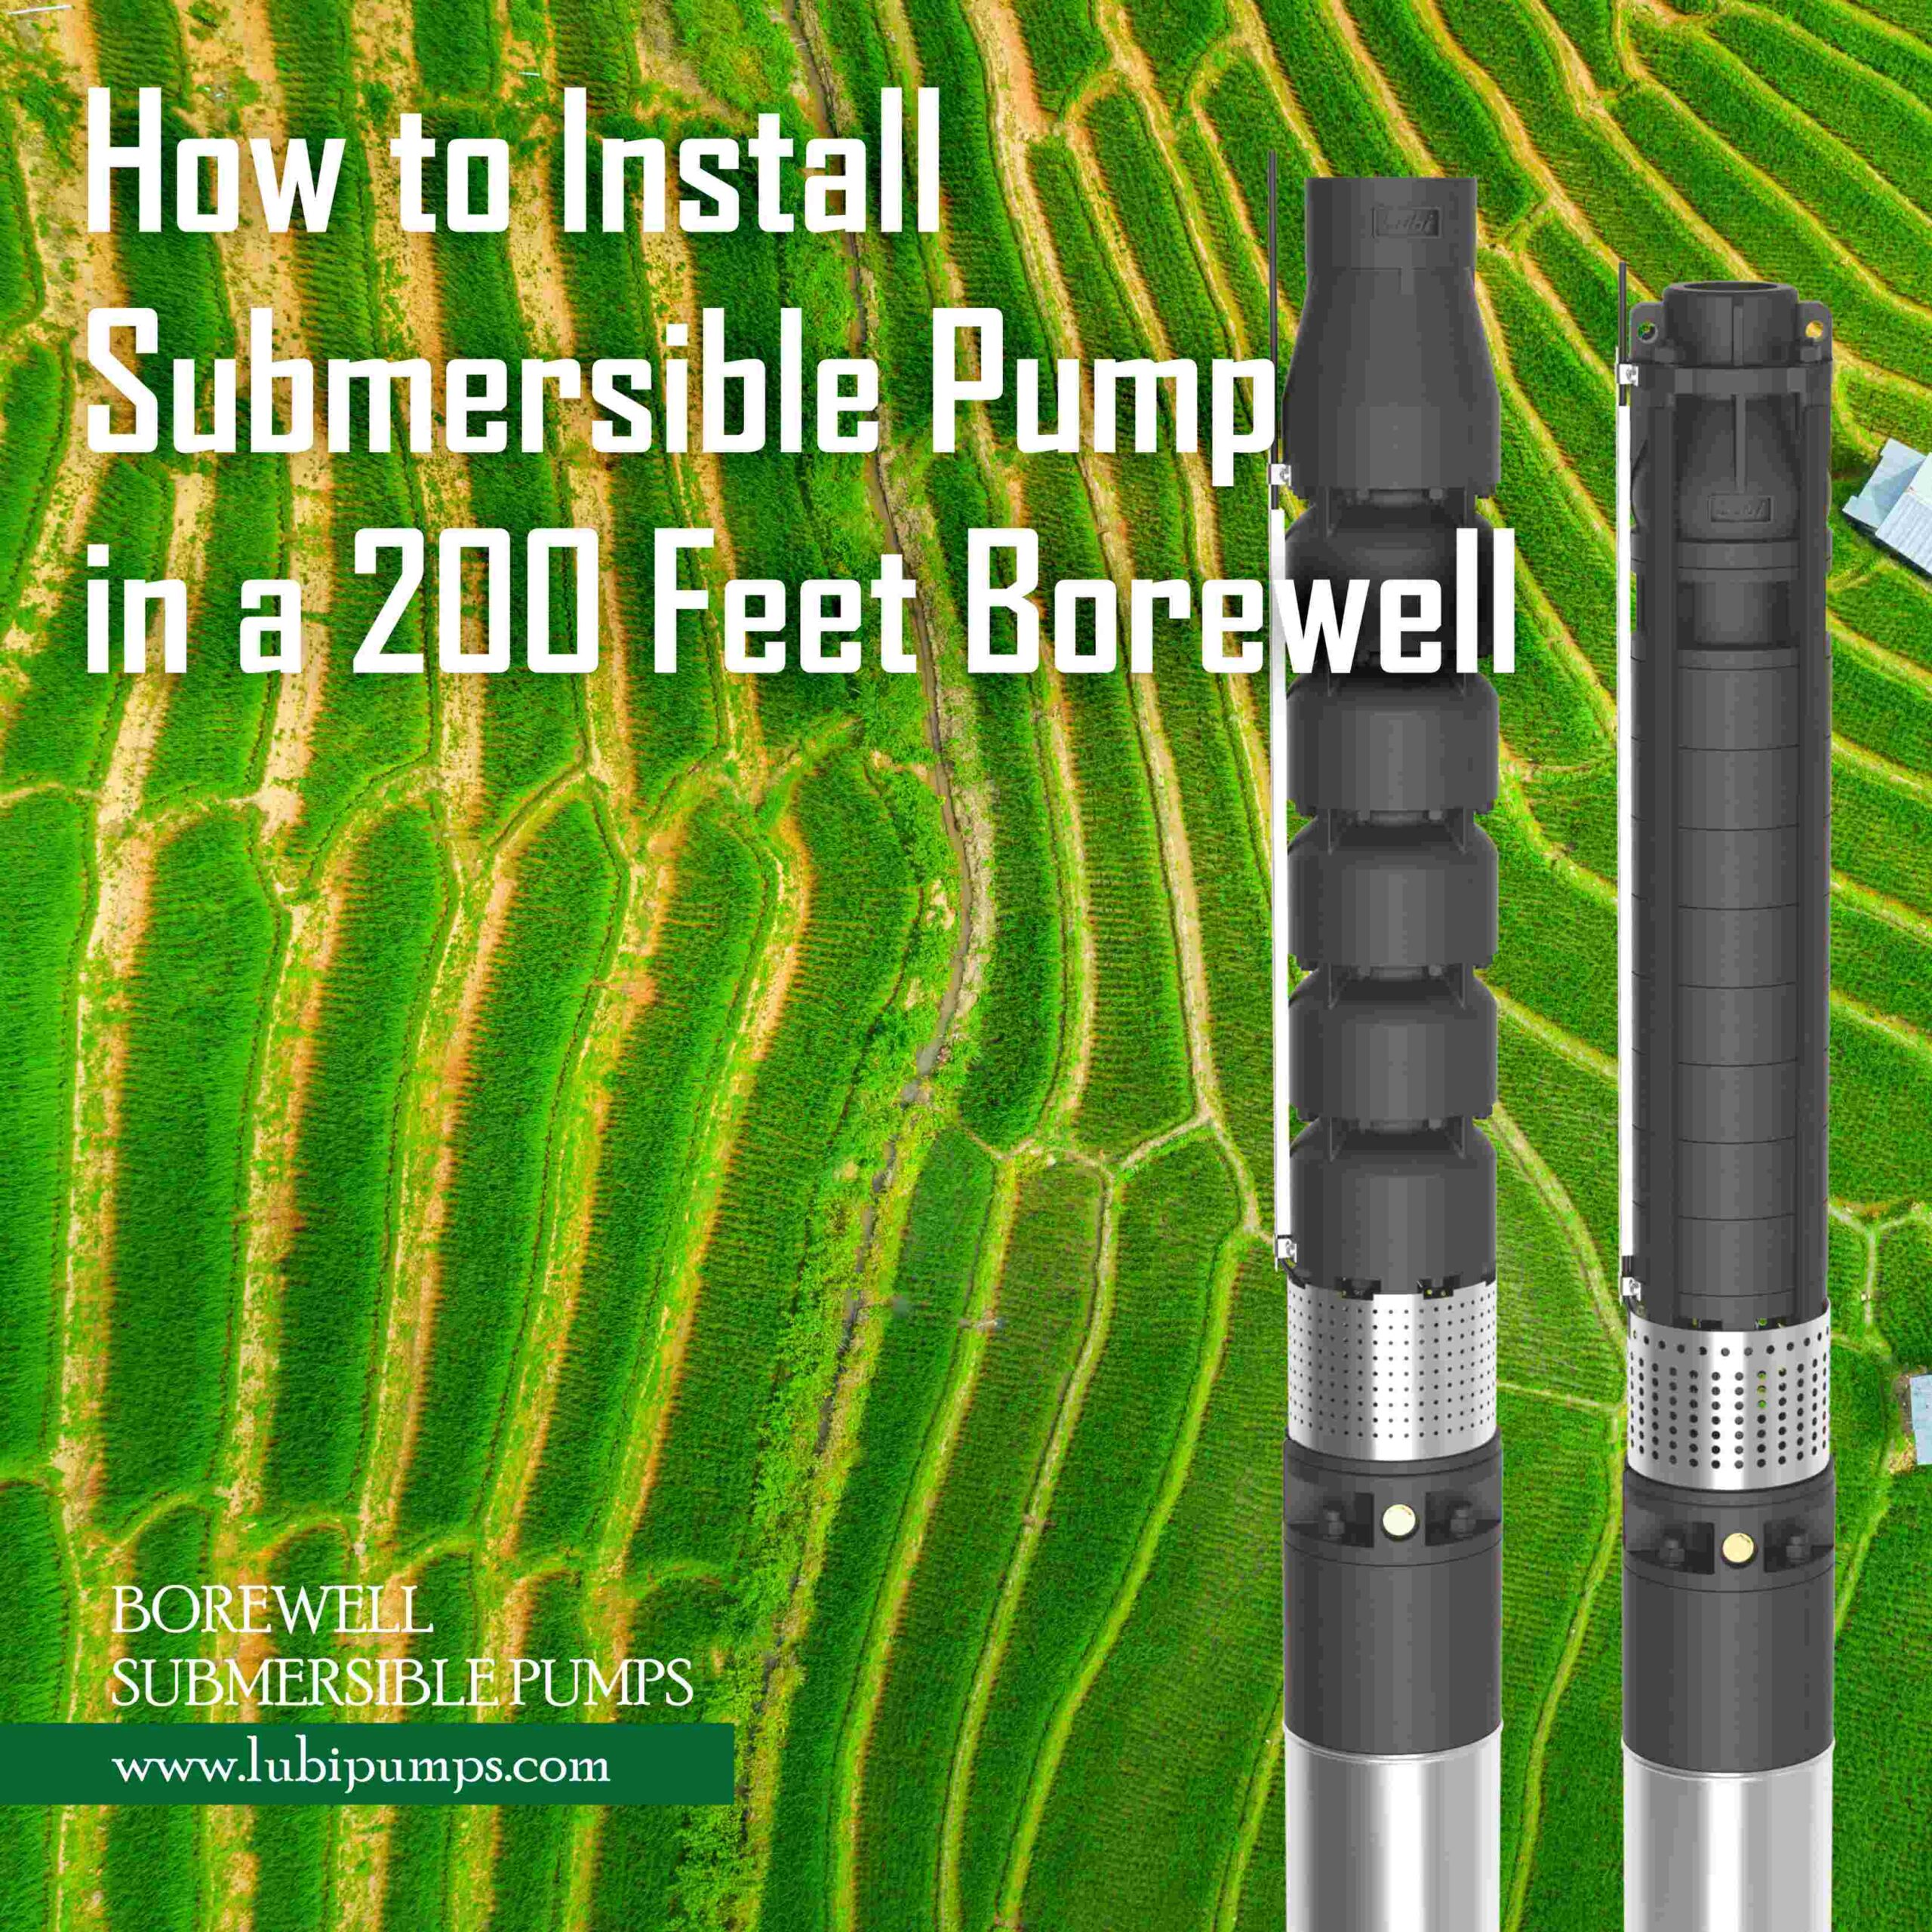 Install a Submersible Pump